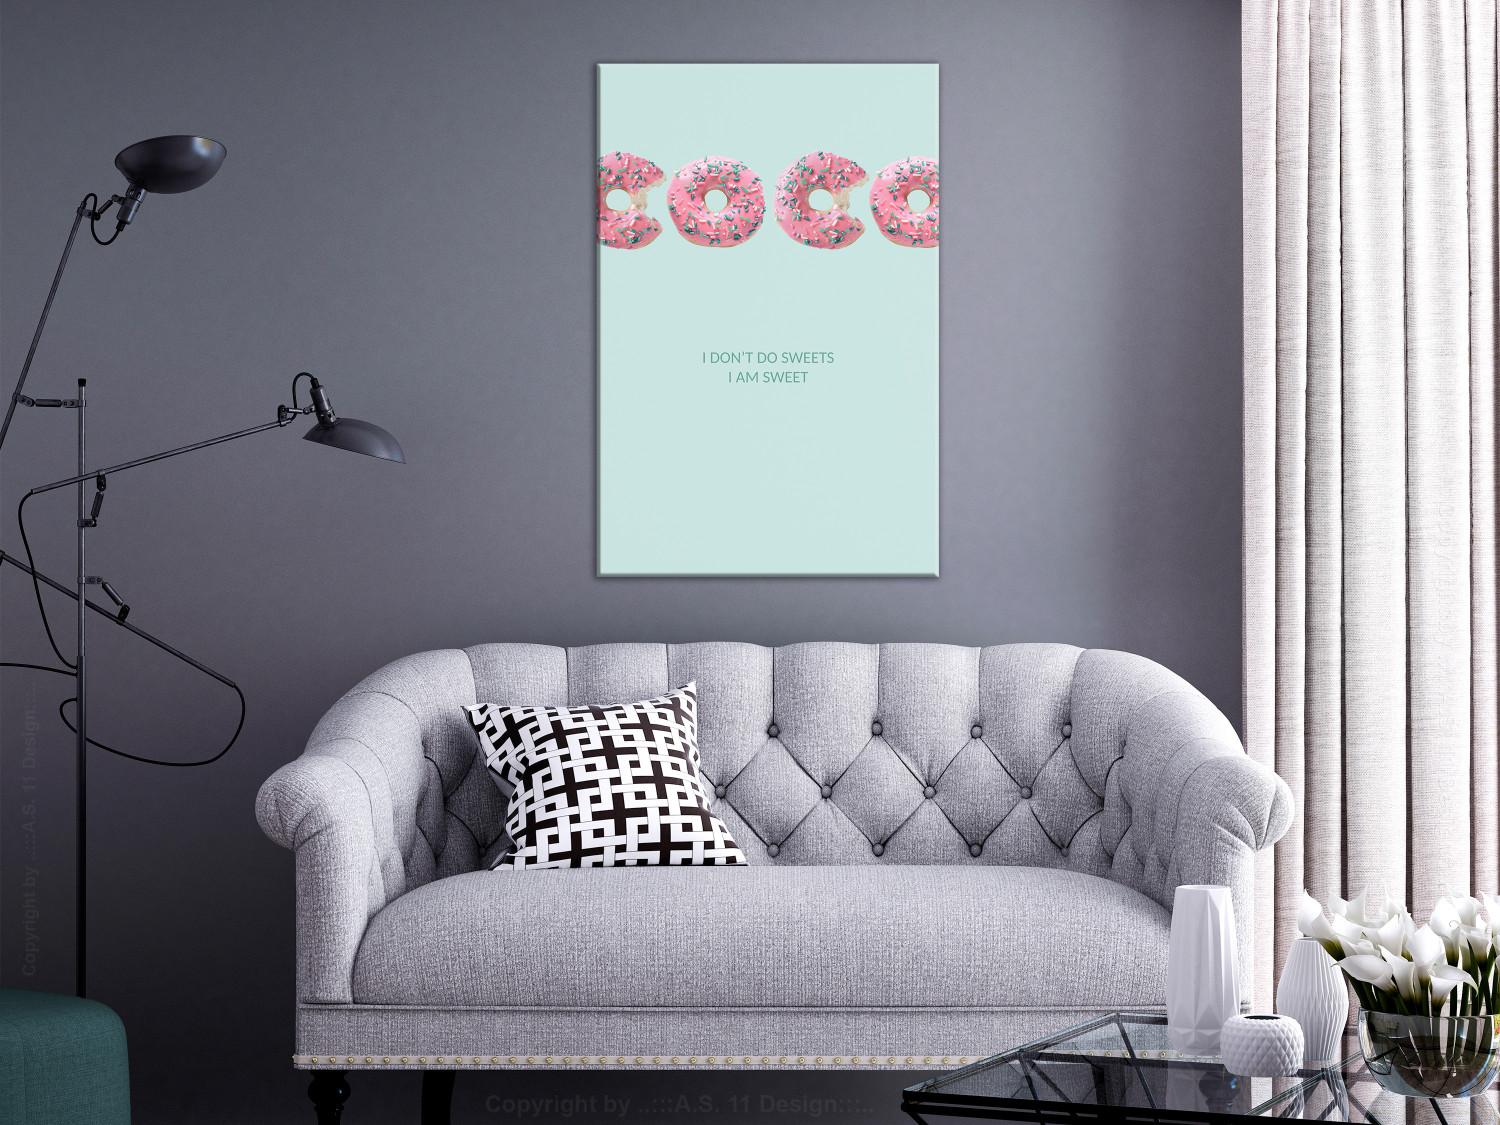 Canvas Green English sign - abstraction with inscription arranged from donuts